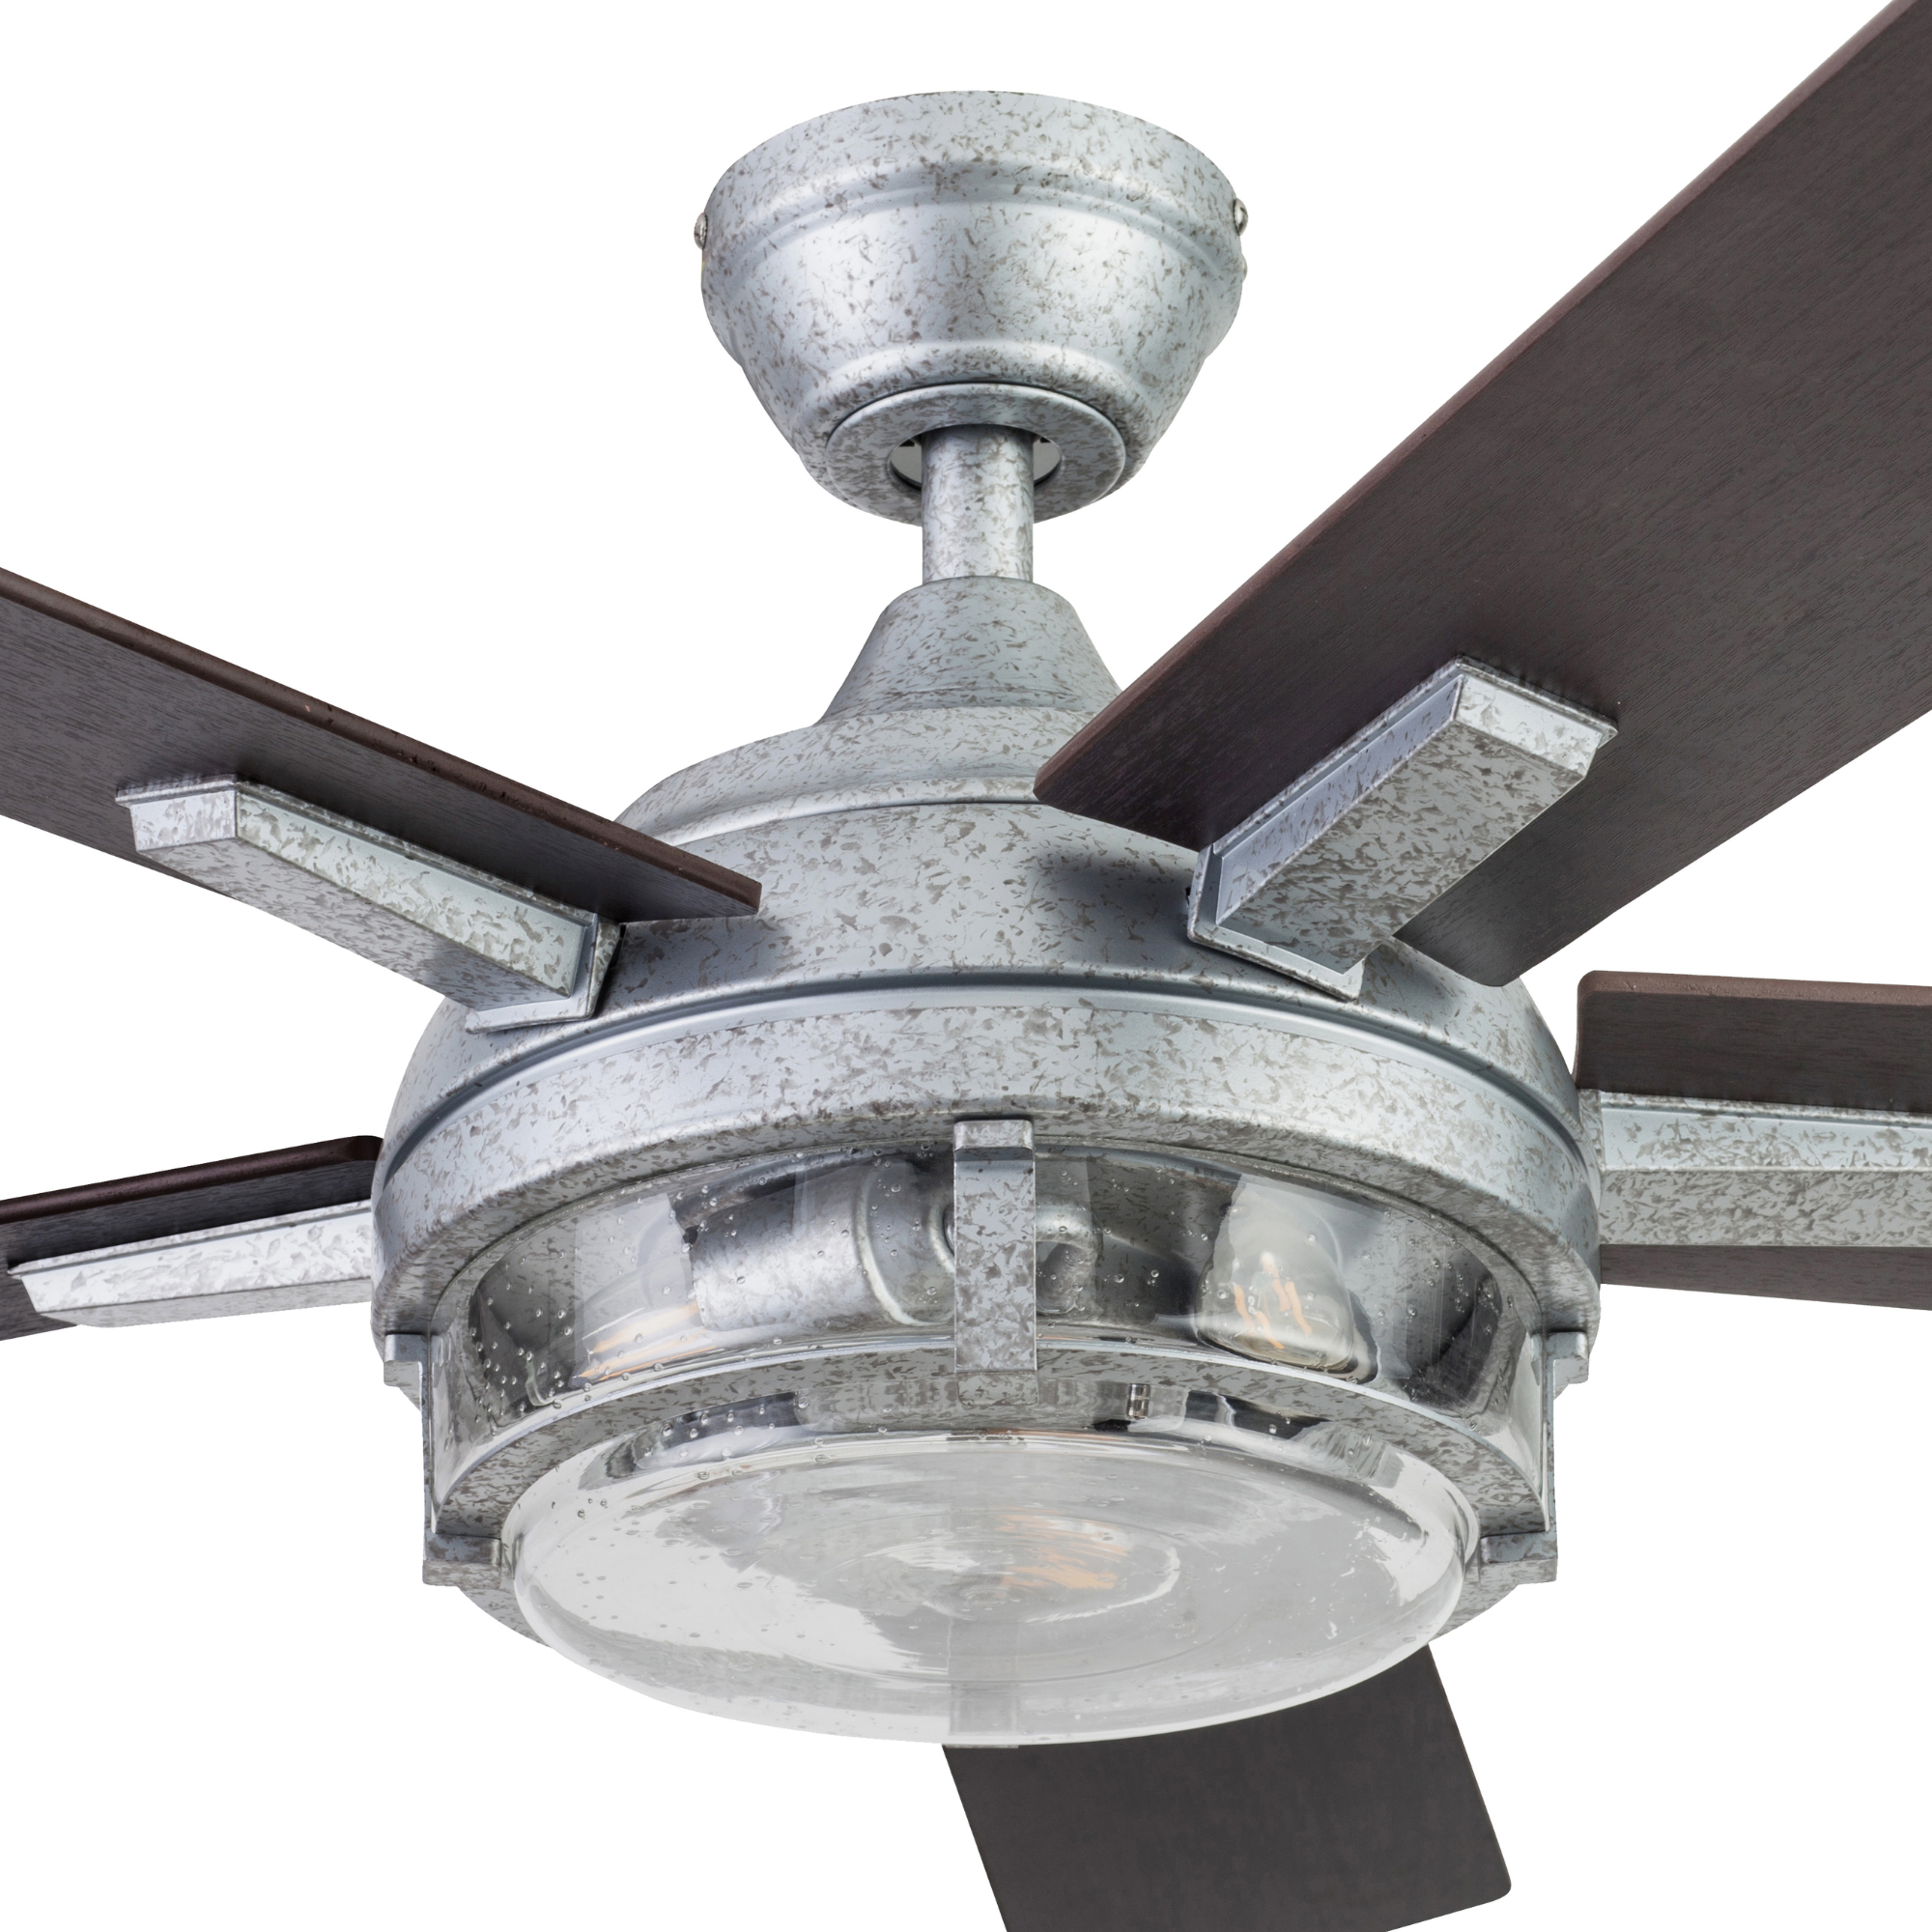 52 Inch Freyr, Galvanized, Remote Control, Indoor/Outdoor Ceiling Fan by Prominence Home